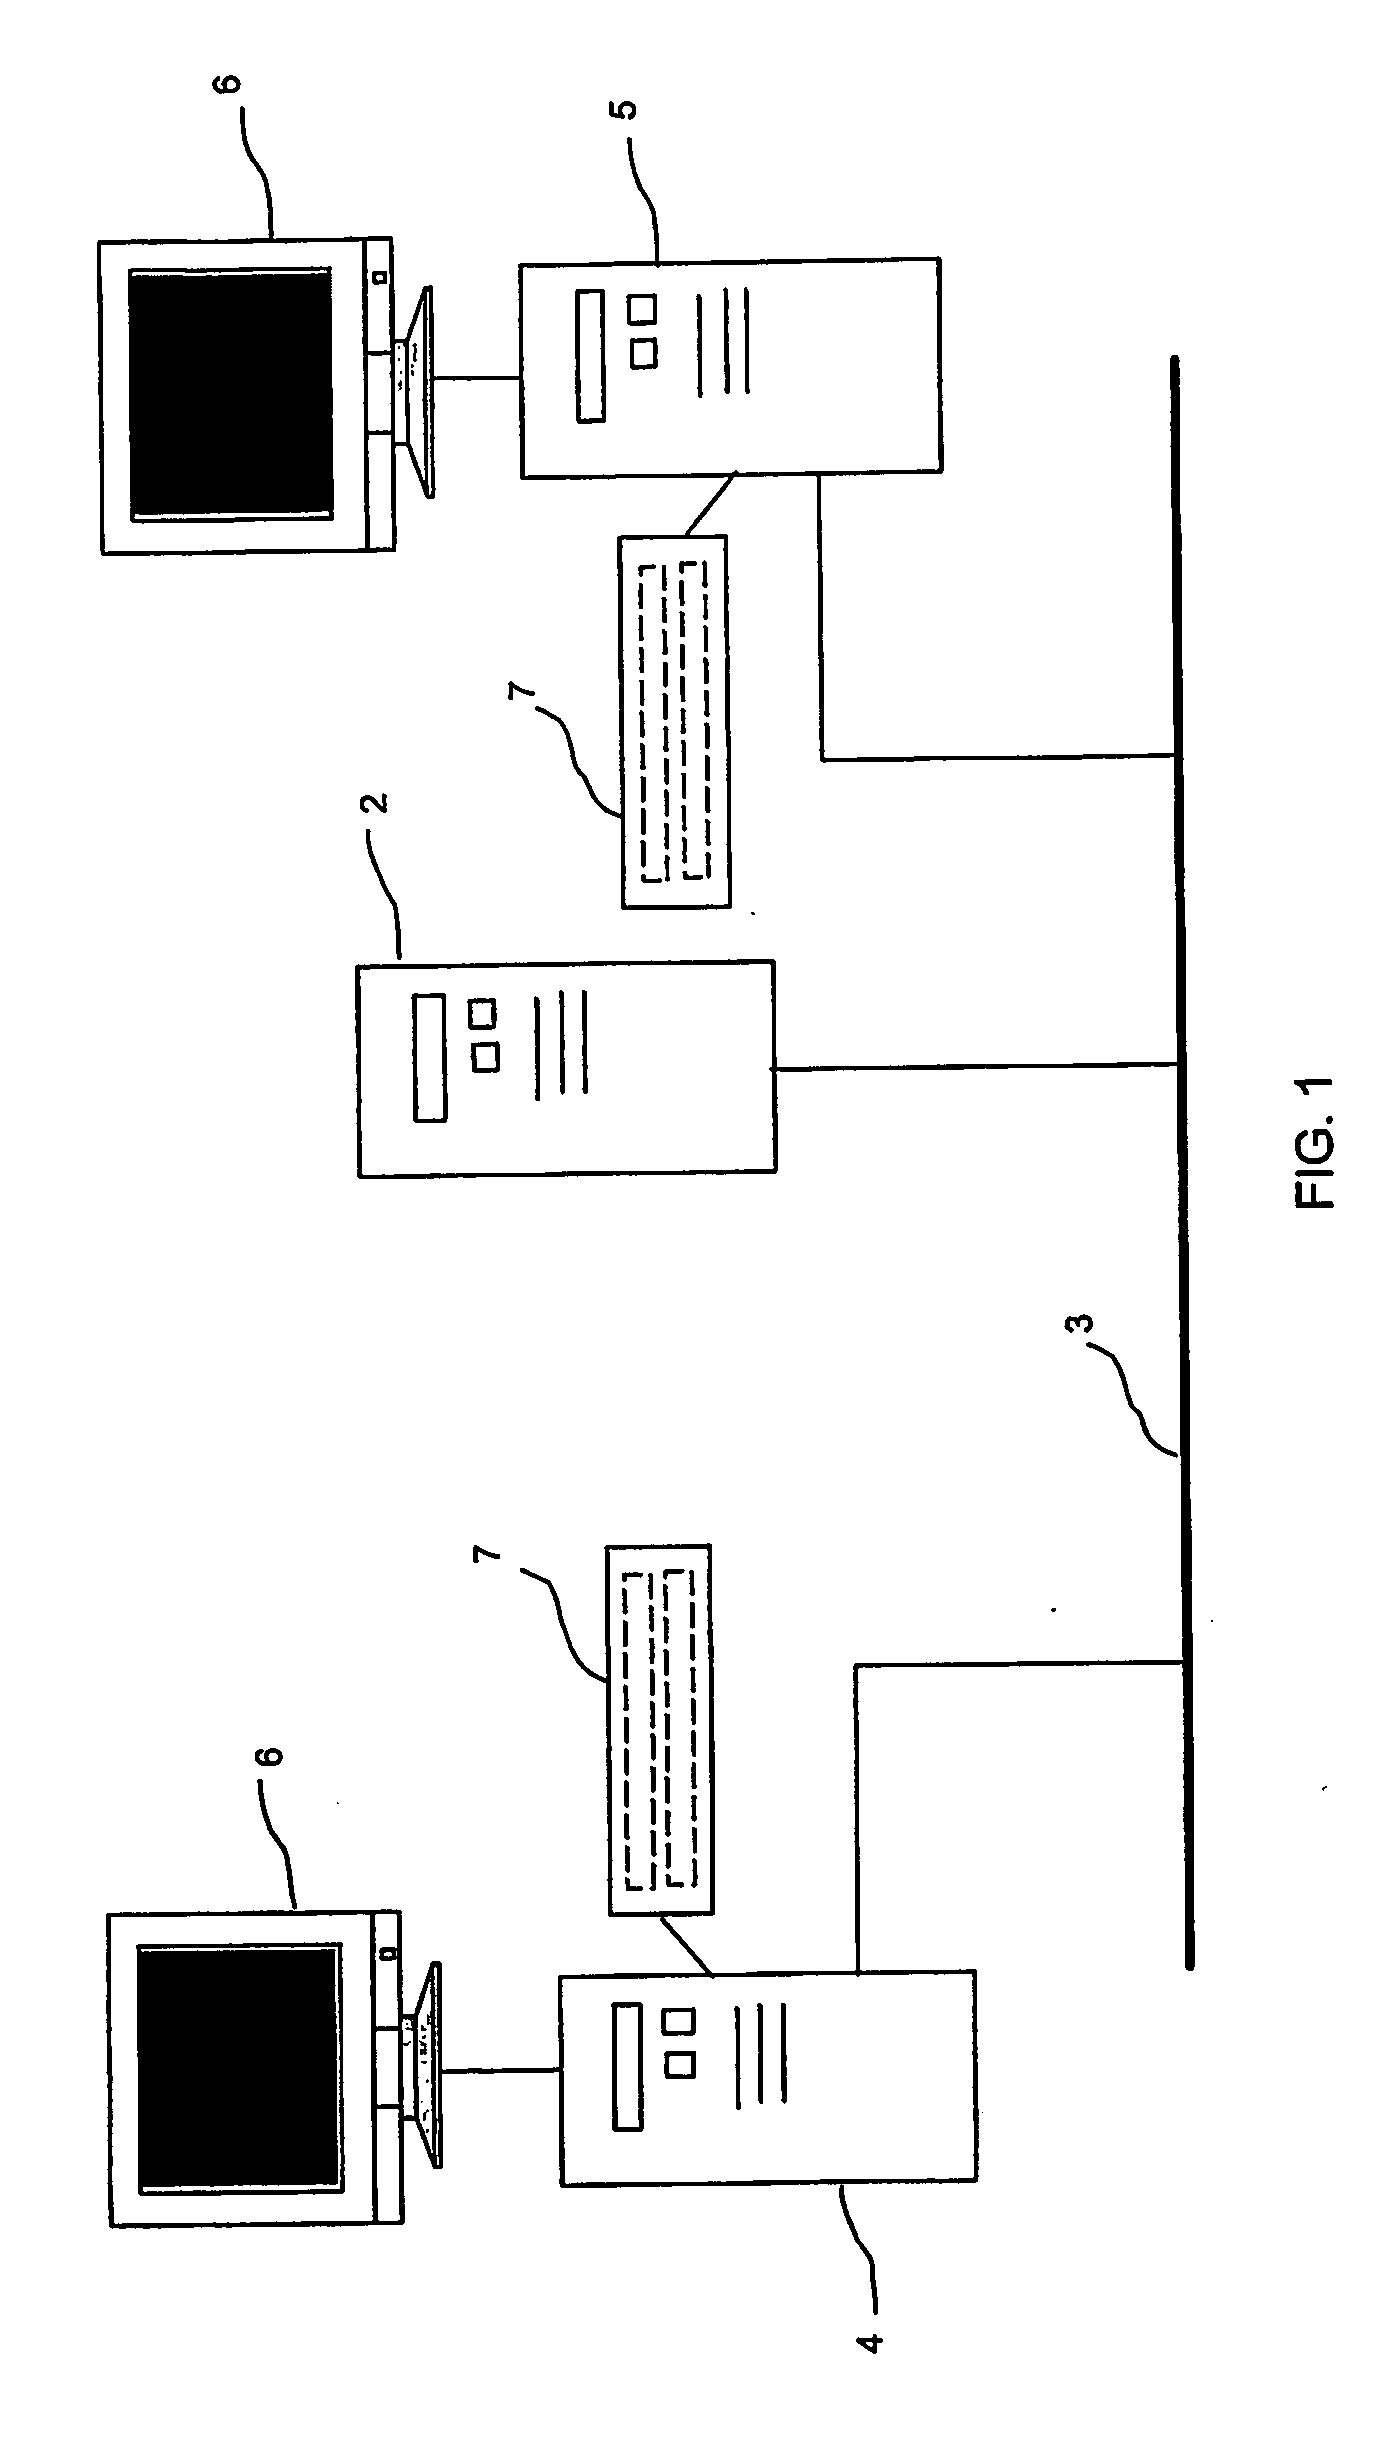 System for permission-based communication and exchange of information